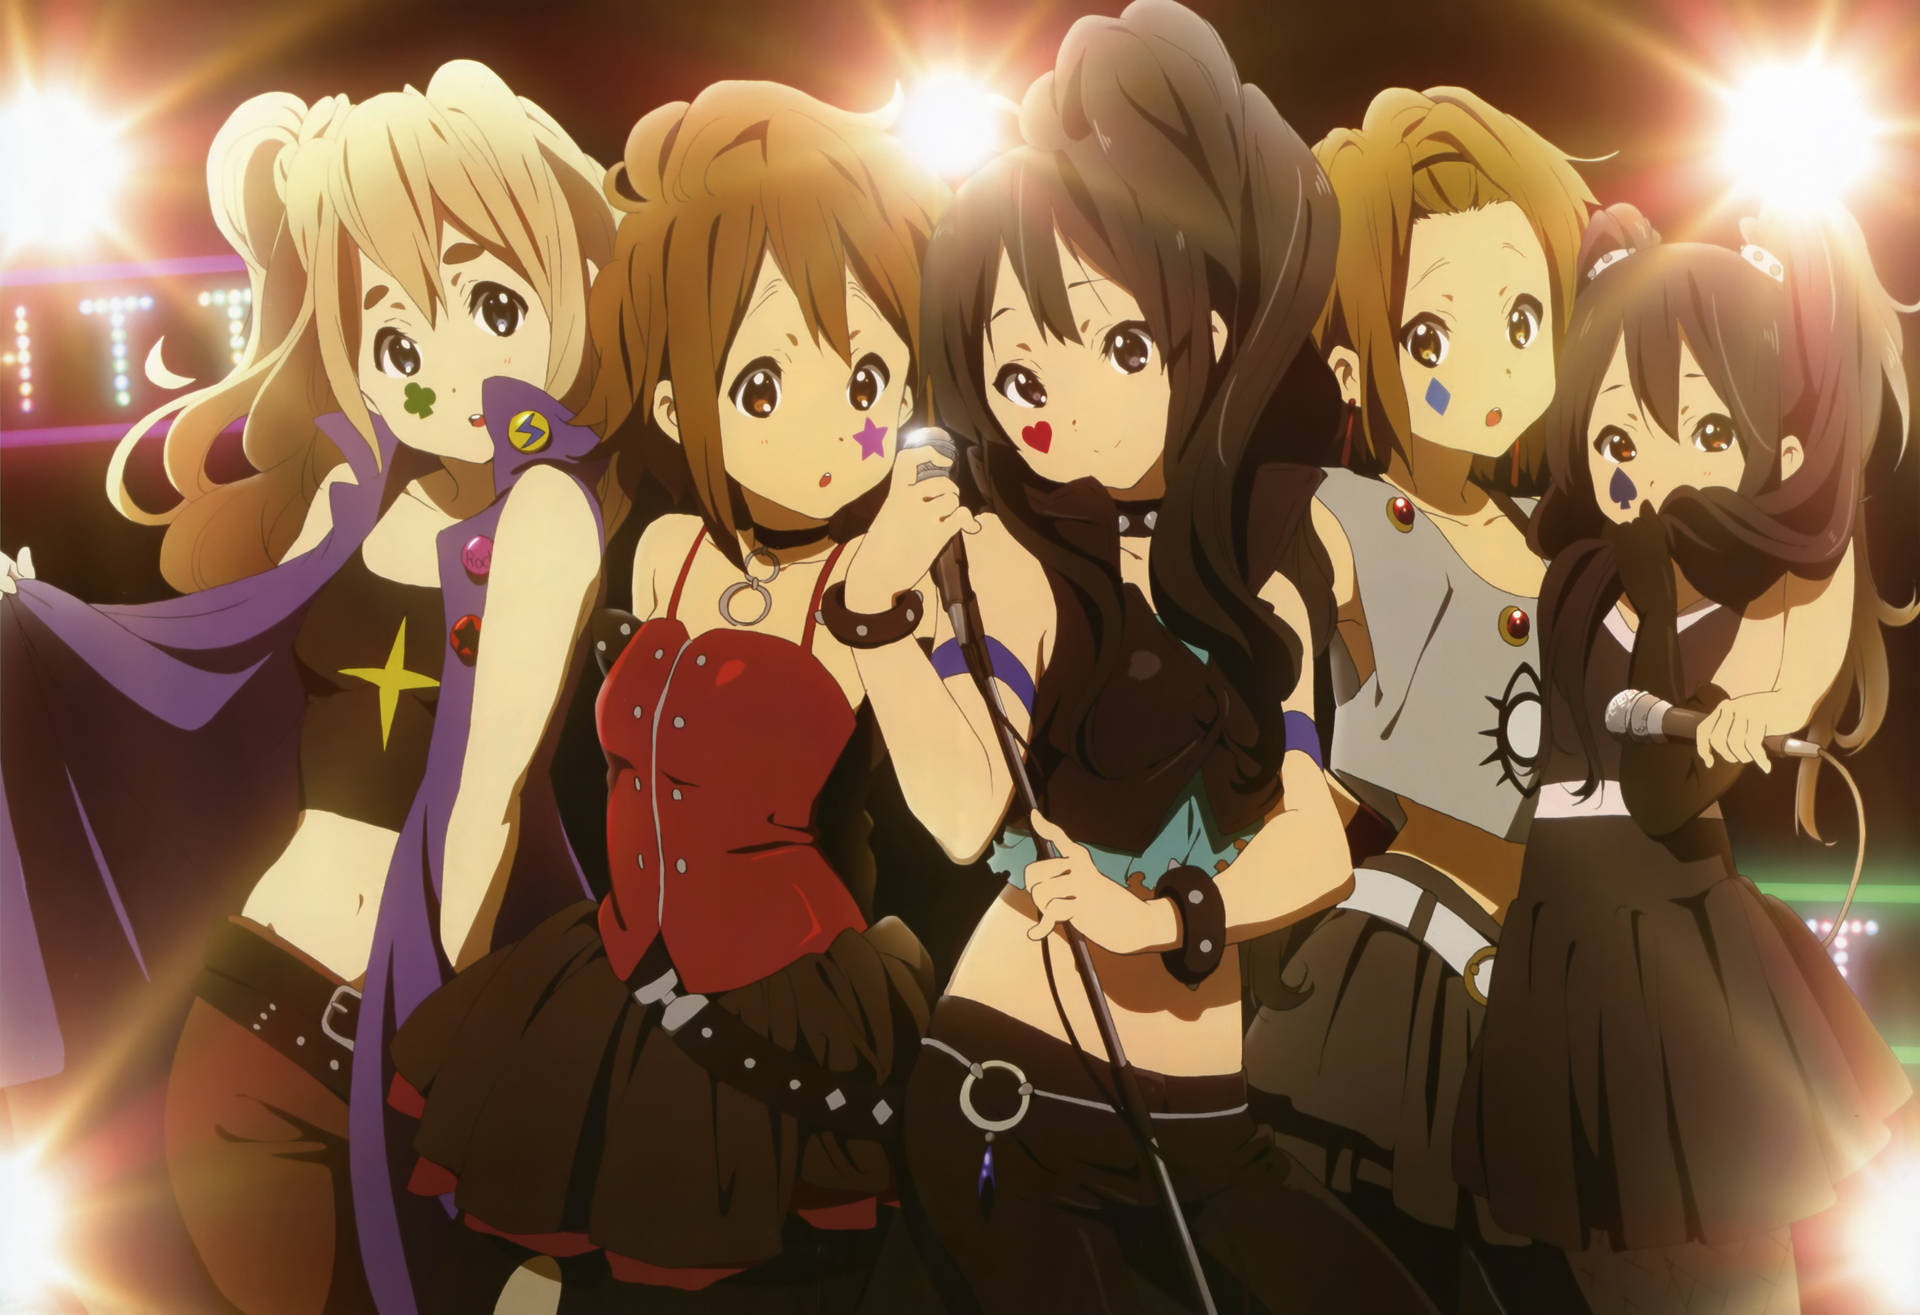 K-on Bank In Punk Outfit Background